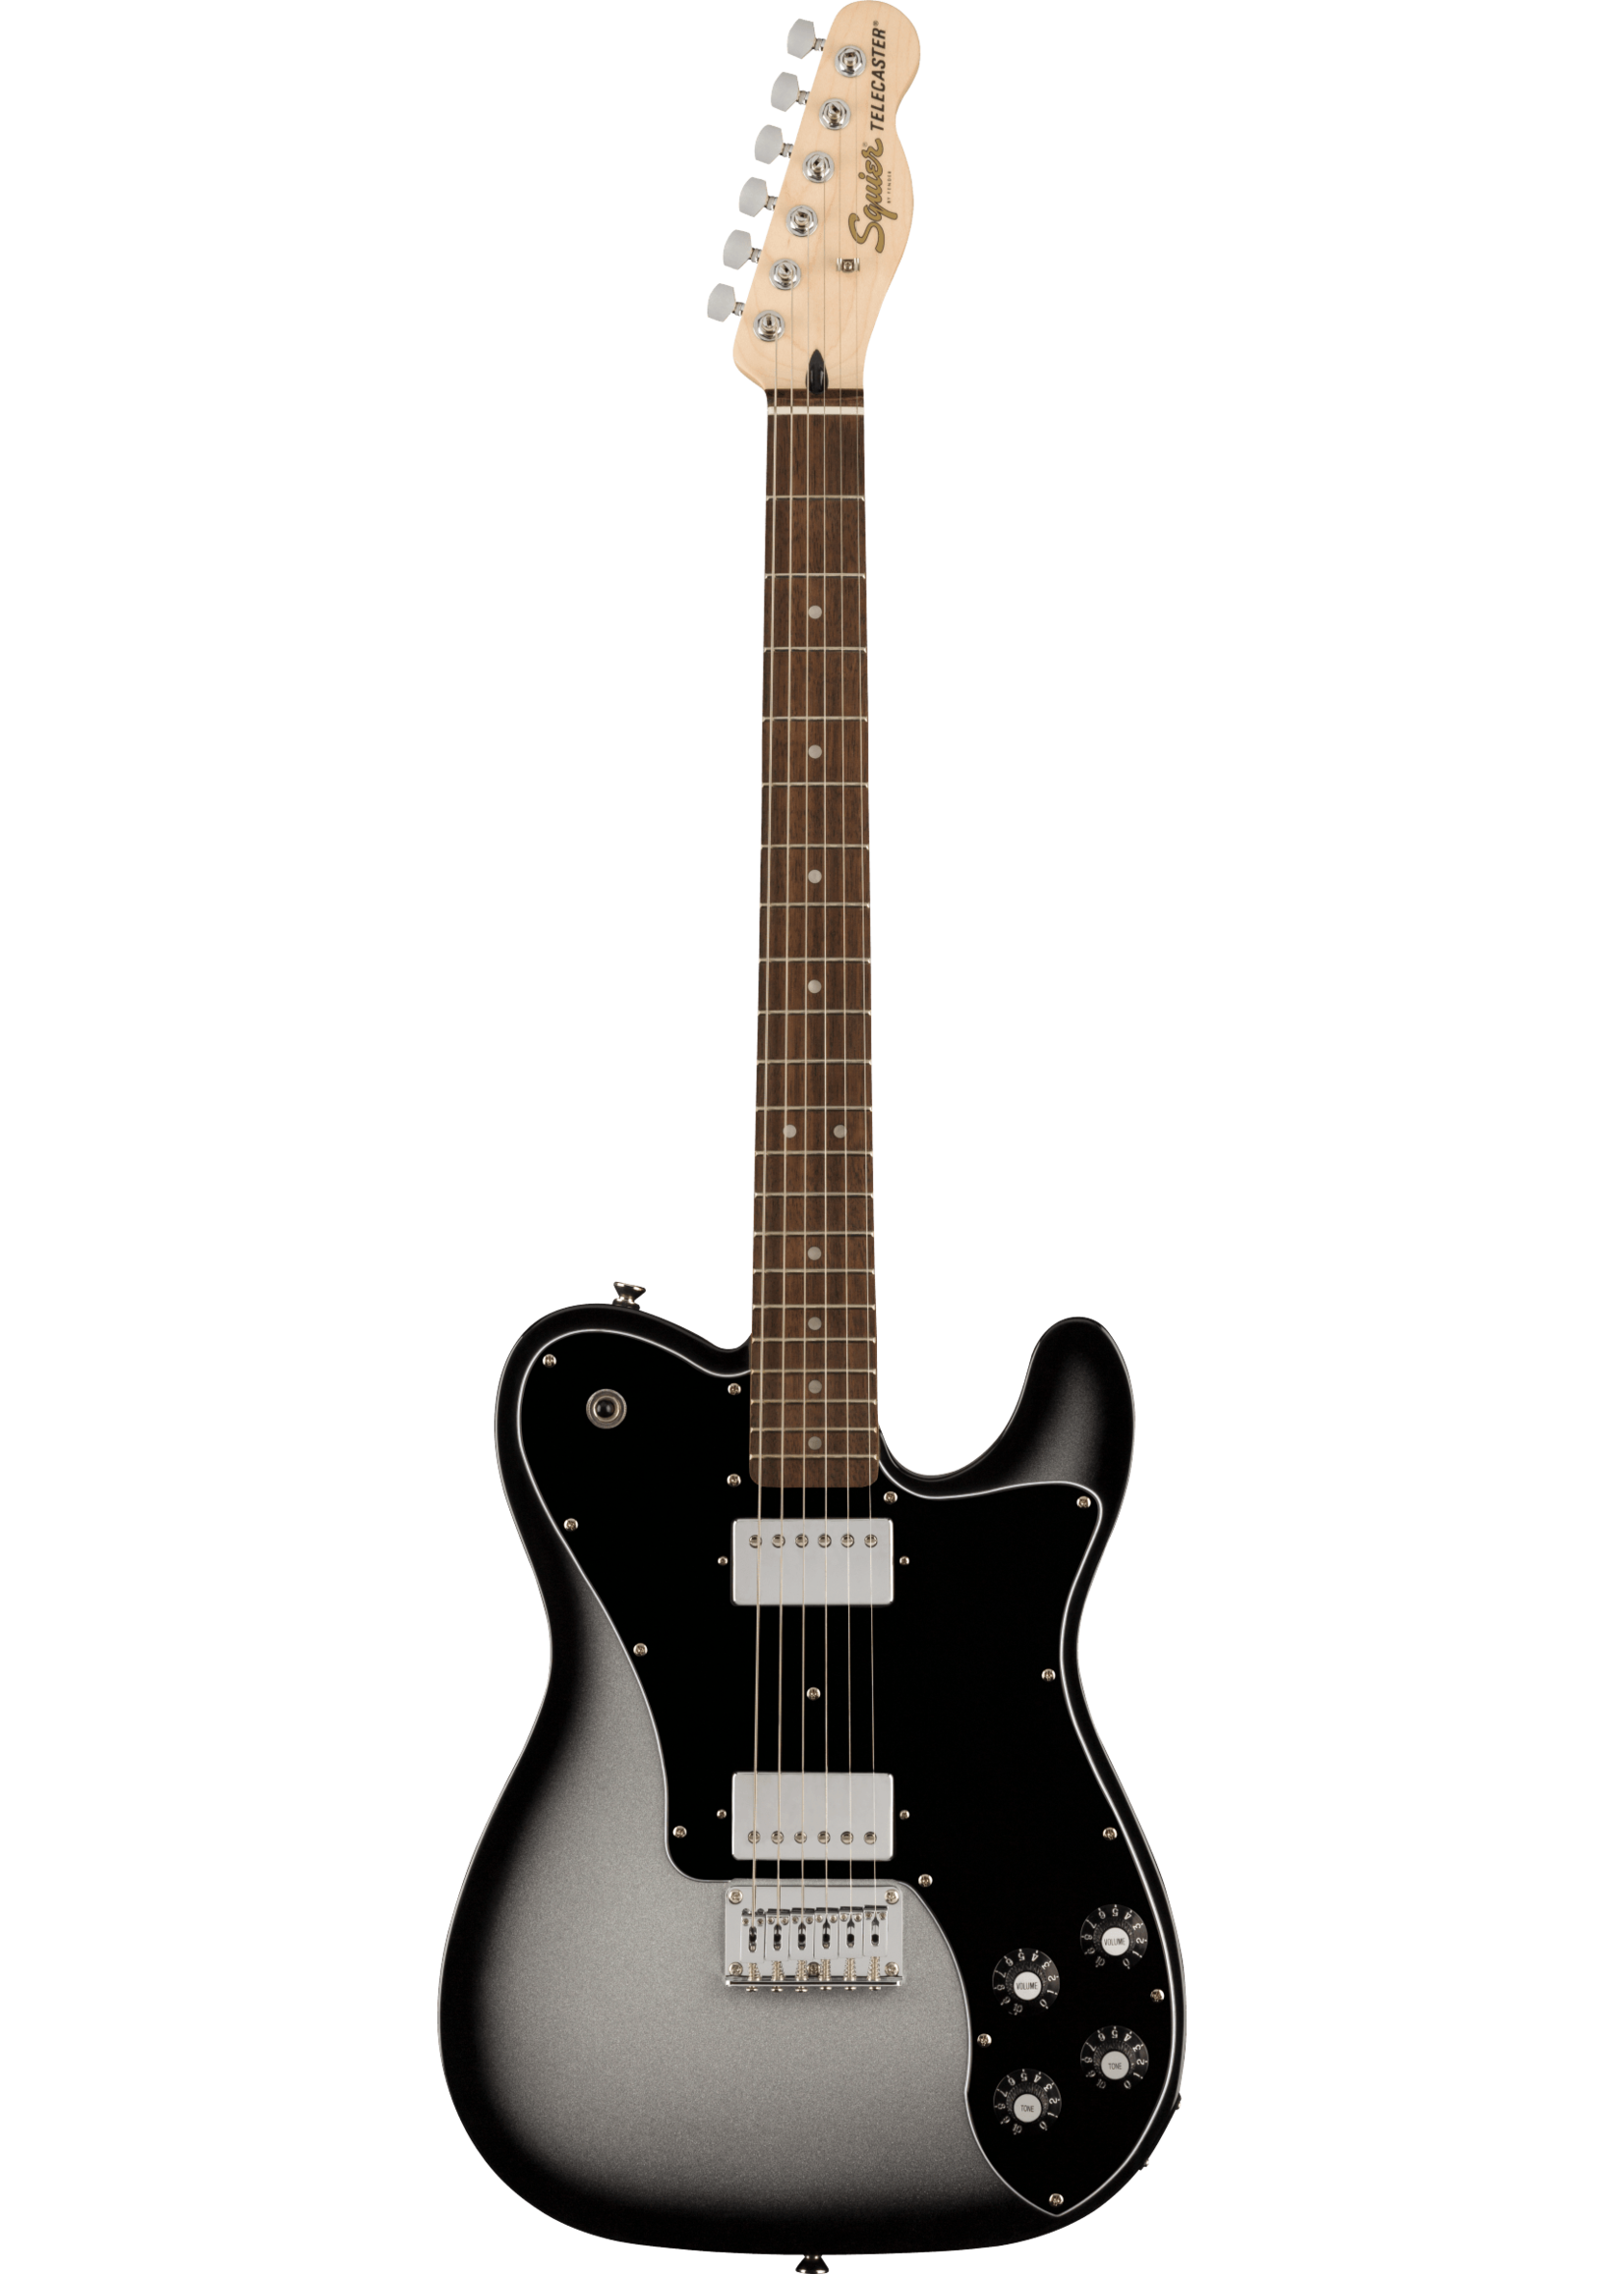 Fender Squier Affinity Telecaster Deluxe - Silverburst - North